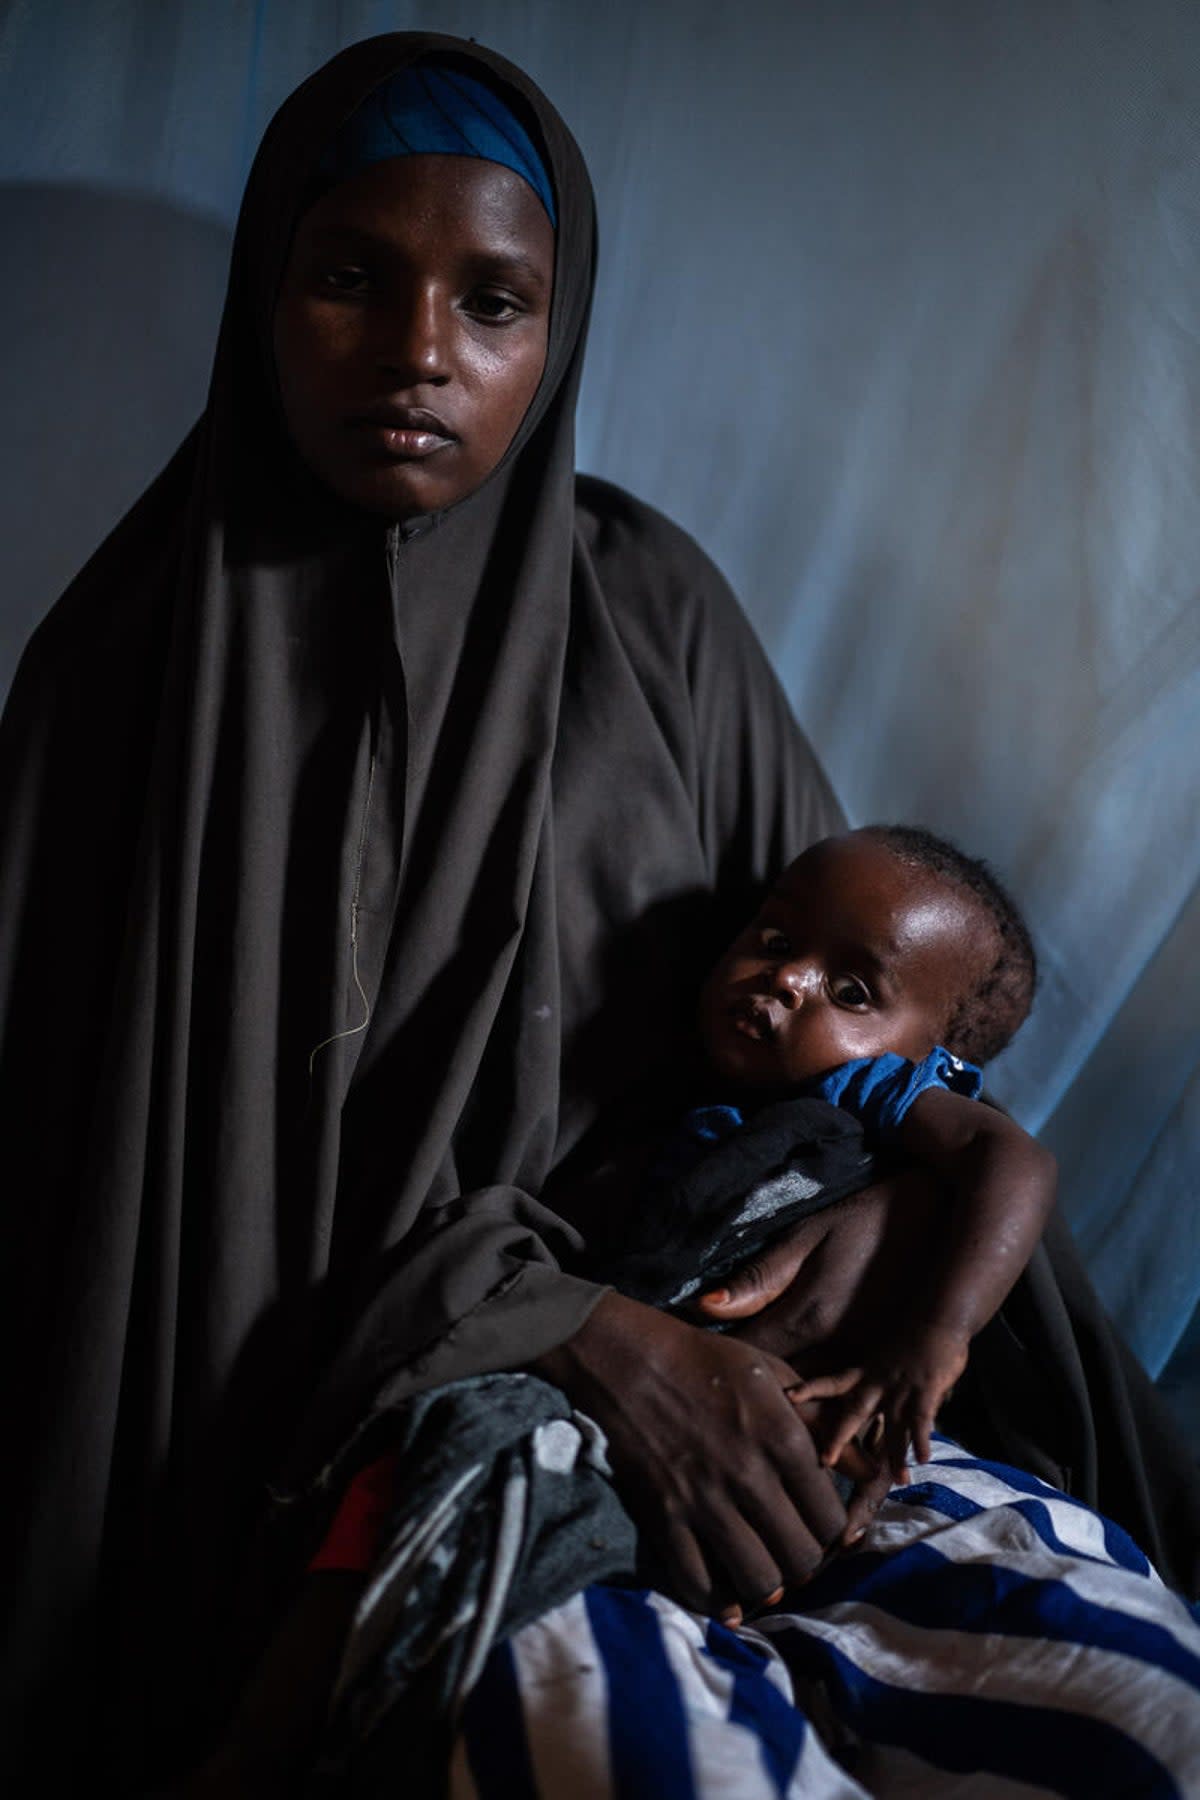 Mother-of-three Naima* was photographed sitting with her baby daughter Najma* in a stabilisation centre in Baidoa (Fredrik Lerneryd/Save the Children)